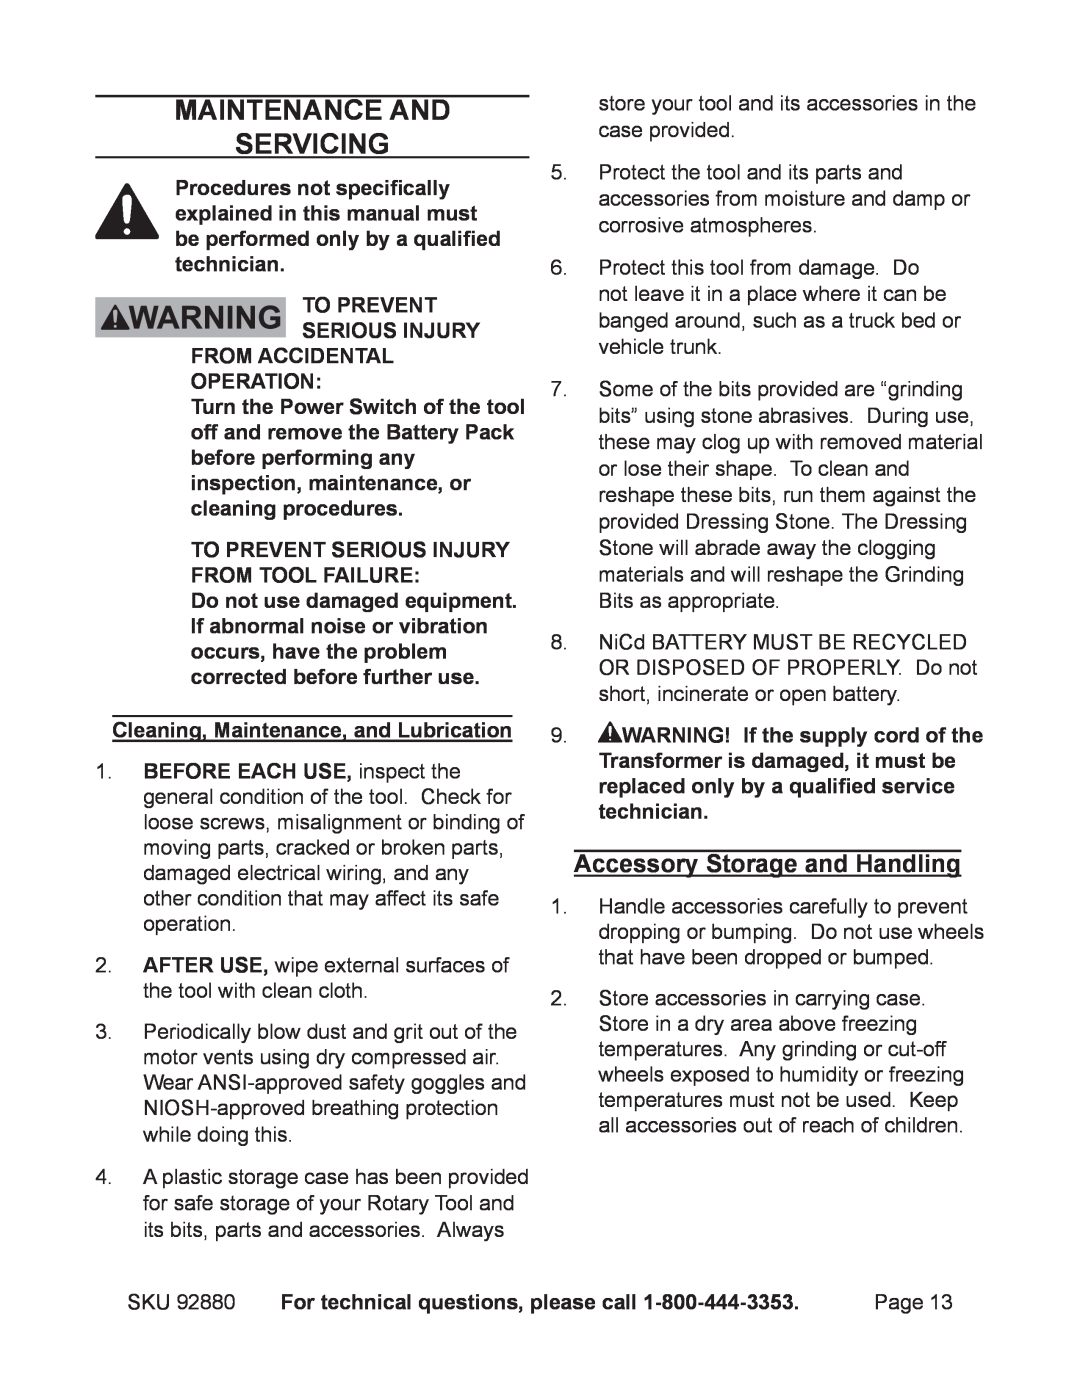 Chicago Electric 92880 operating instructions Maintenance And Servicing, Accessory Storage and Handling 